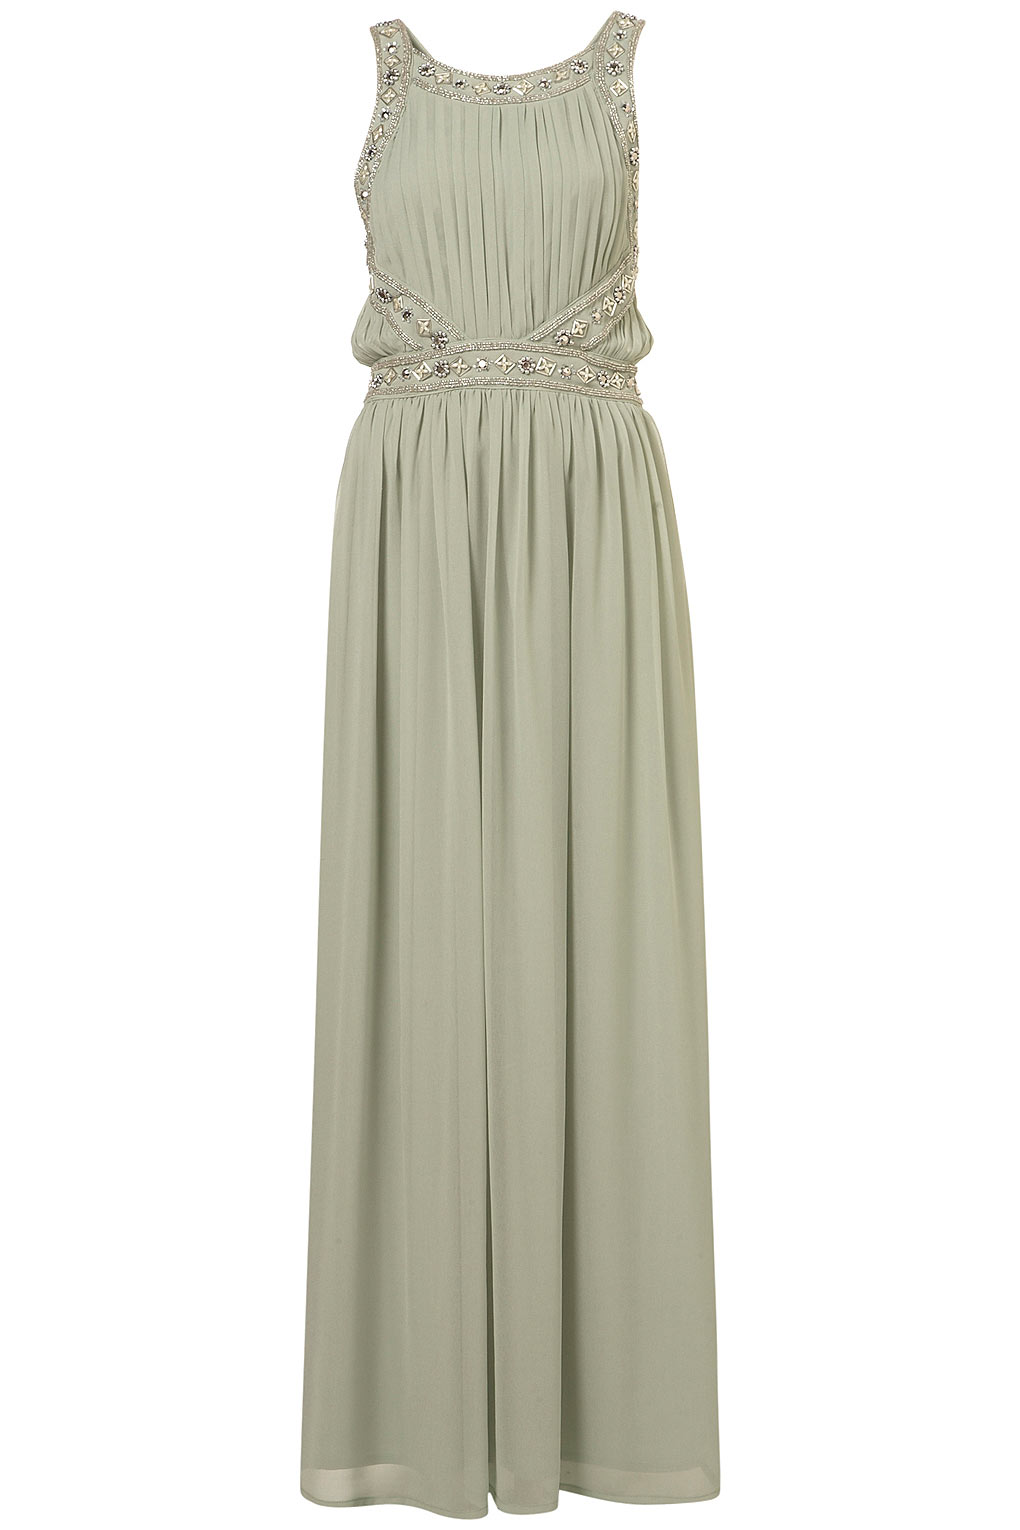 Lyst - Topshop Embellished Panel Maxi Dress in Green